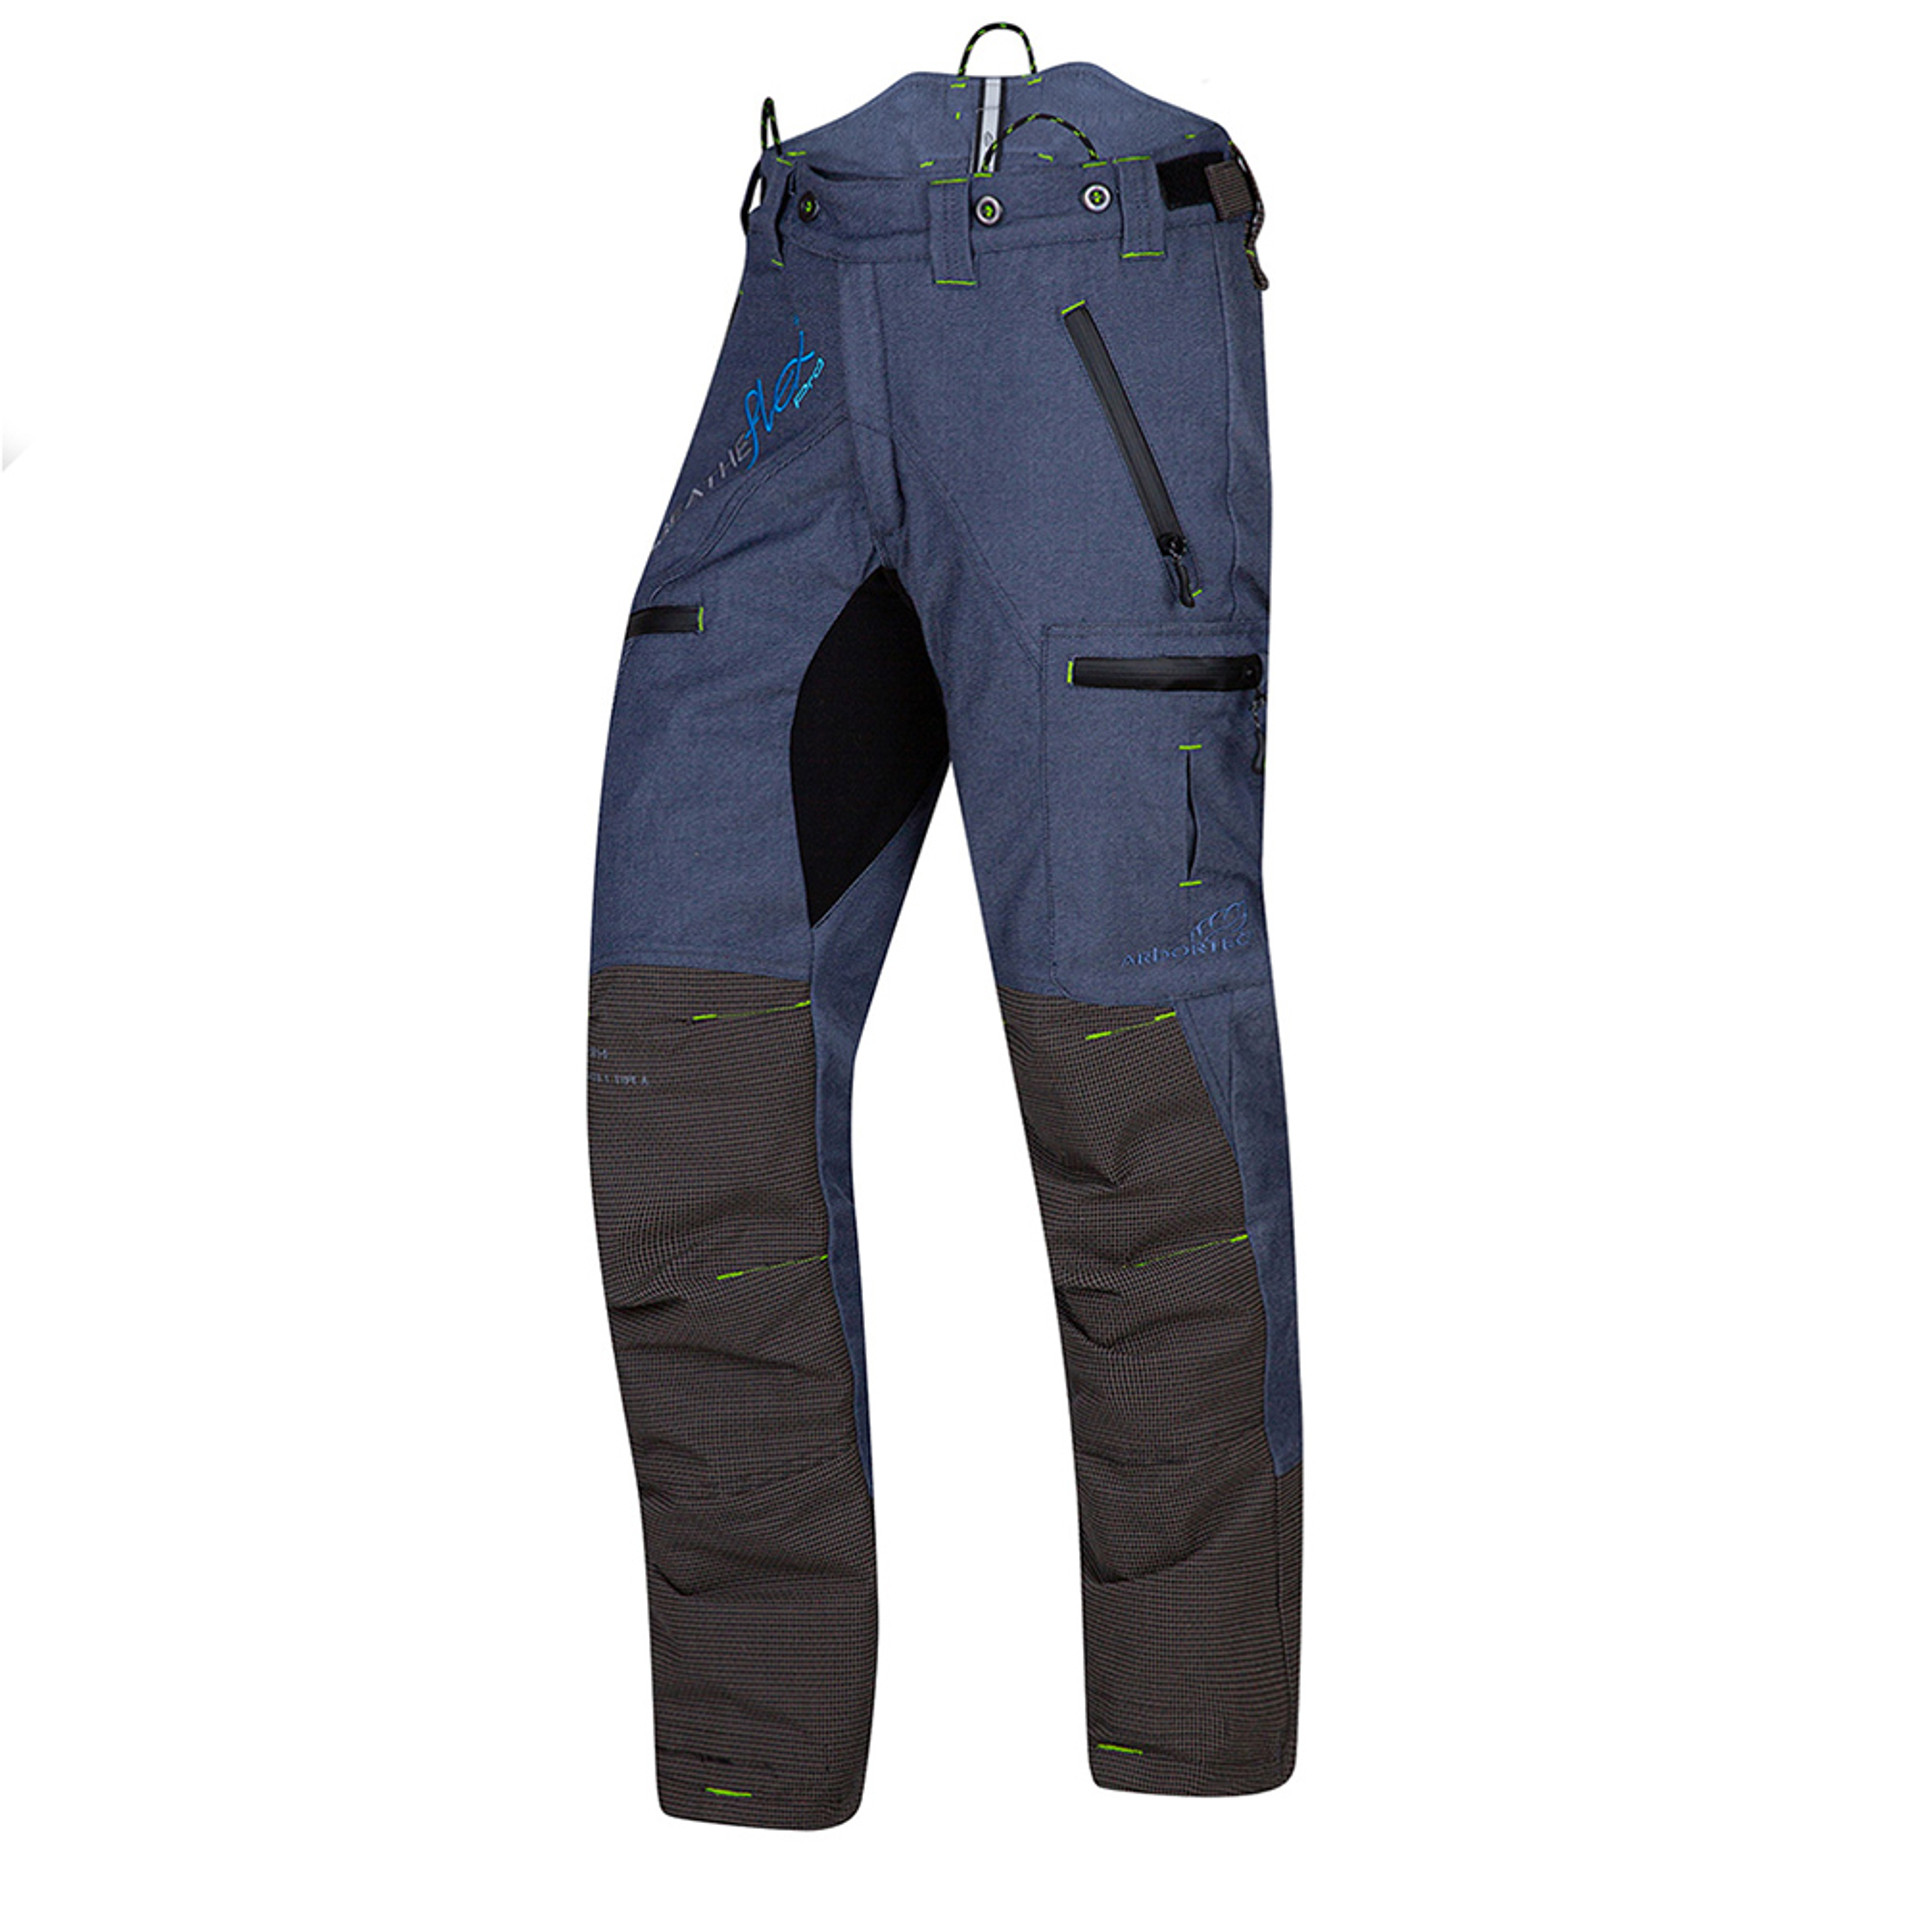 Buy Clogger Ascend Gen 2 Chainsaw Pants by Clogger, Quality Gear For  Arborist